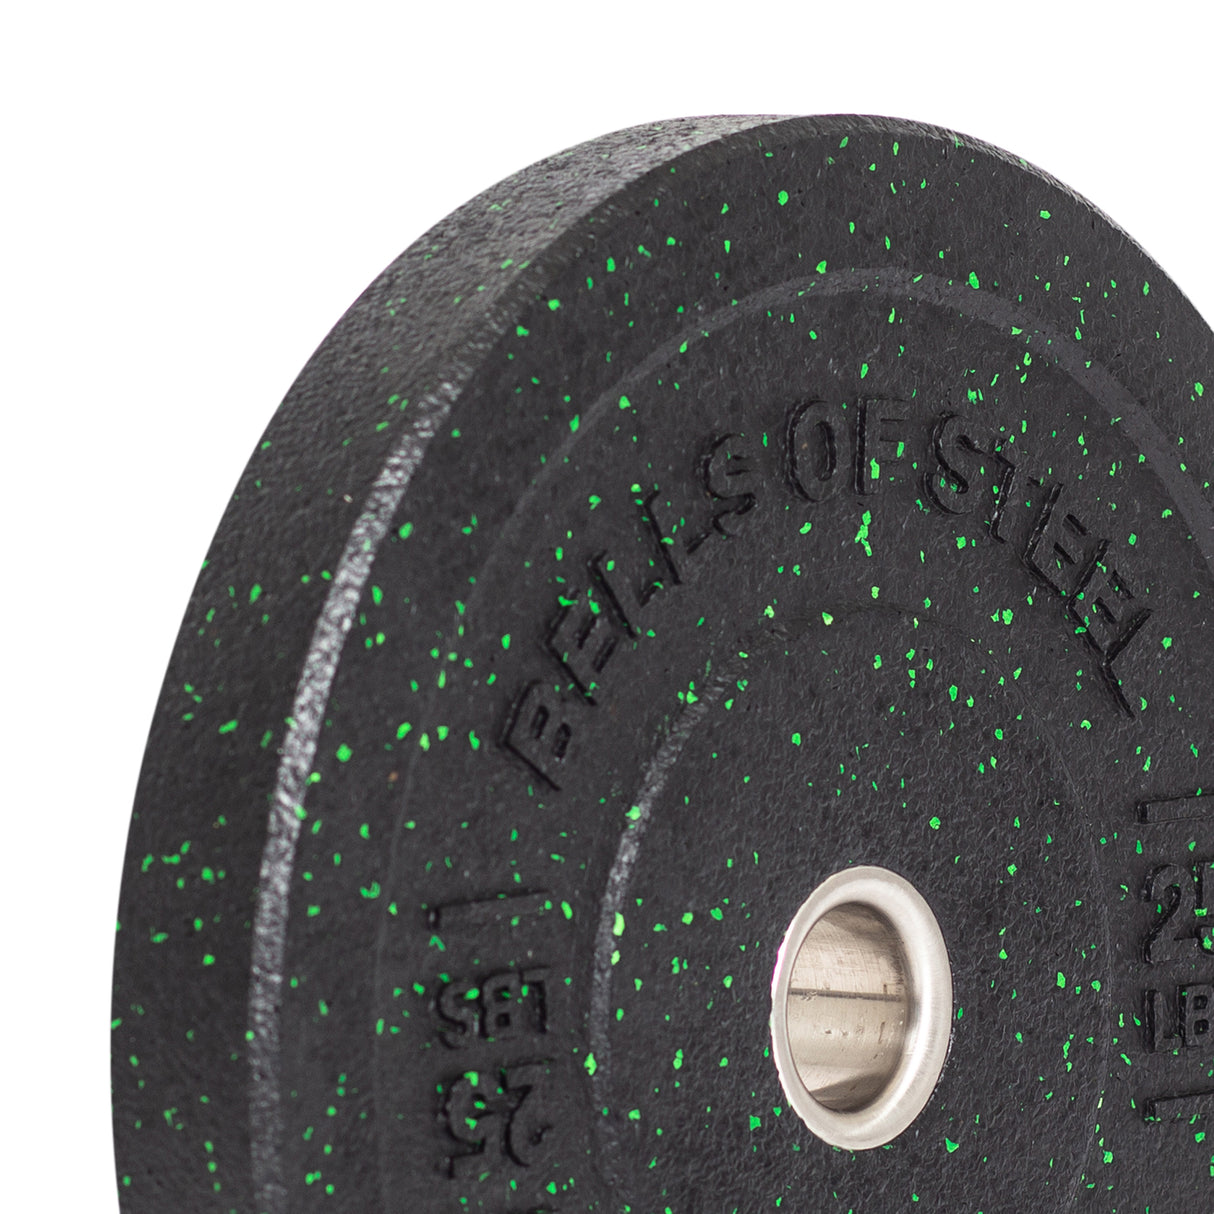 25 LBS Crumb Bumper Plates for weightlifting